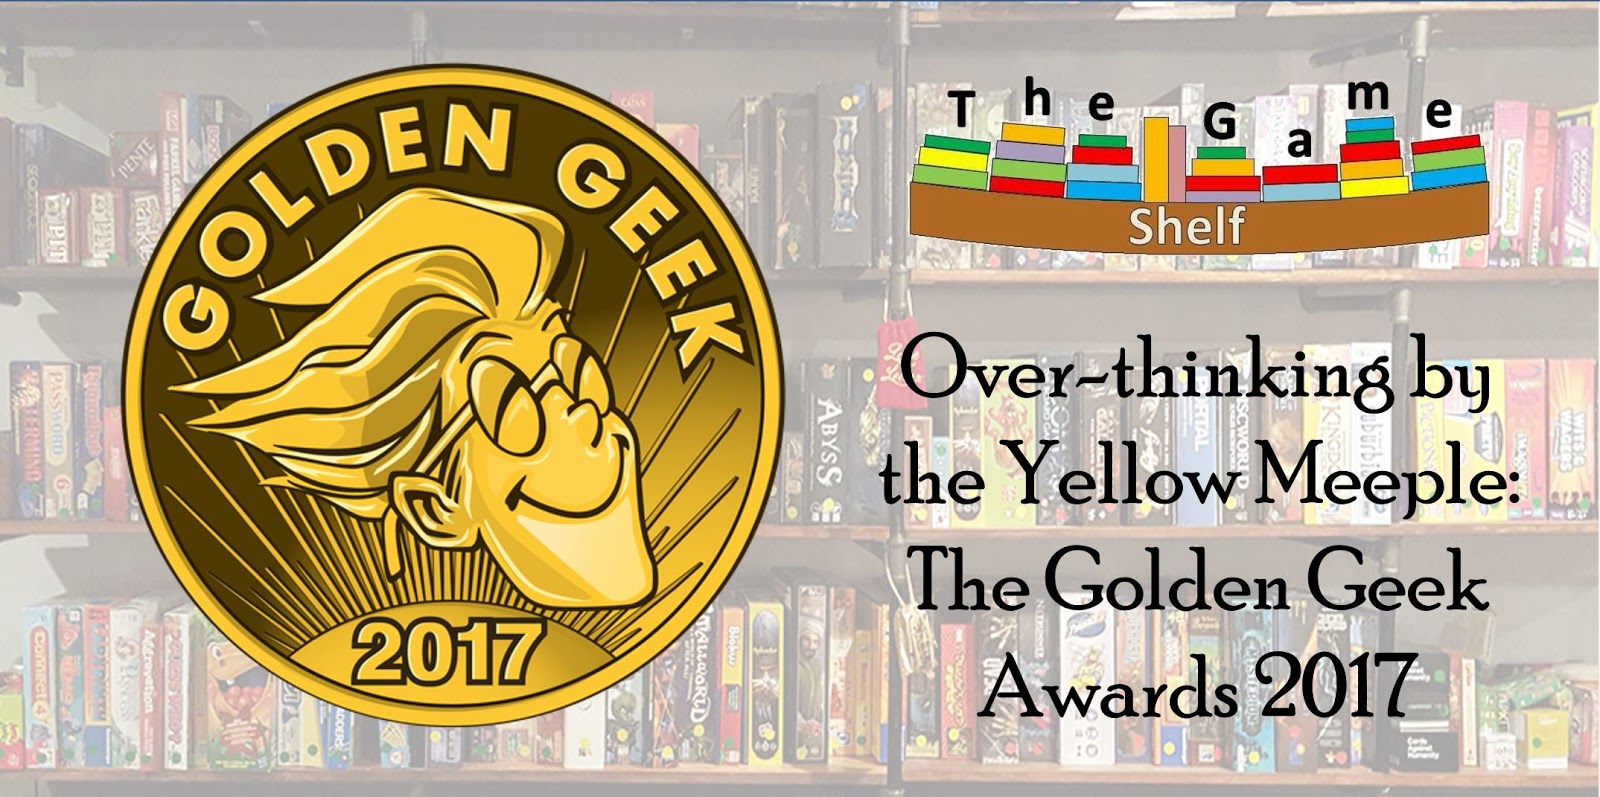 The Game Shelf: Over-thinking by the Yellow Meeple: The Golden Geek Awards  2017